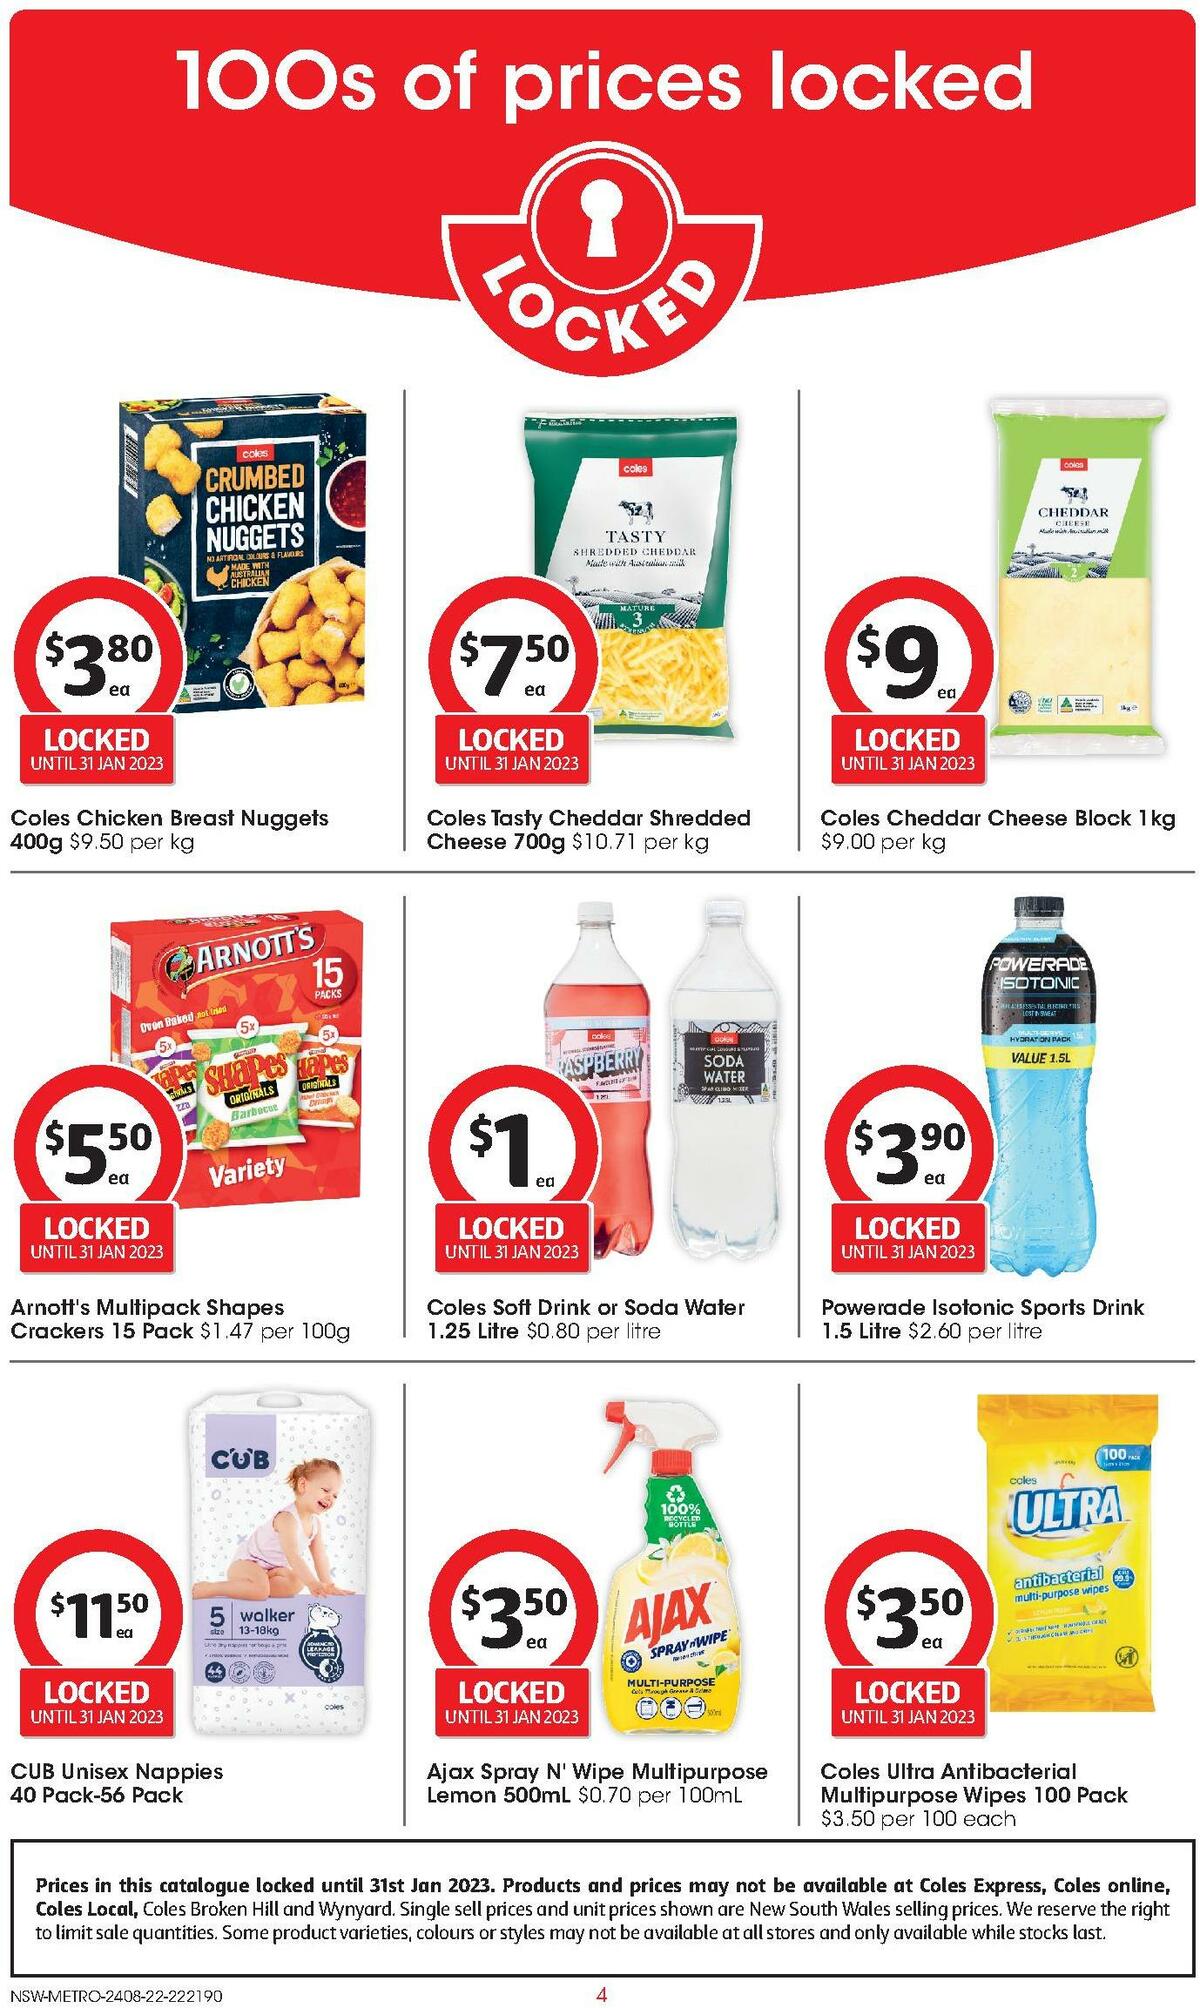 Coles 100s of Prices Locked Catalogues from 24 August